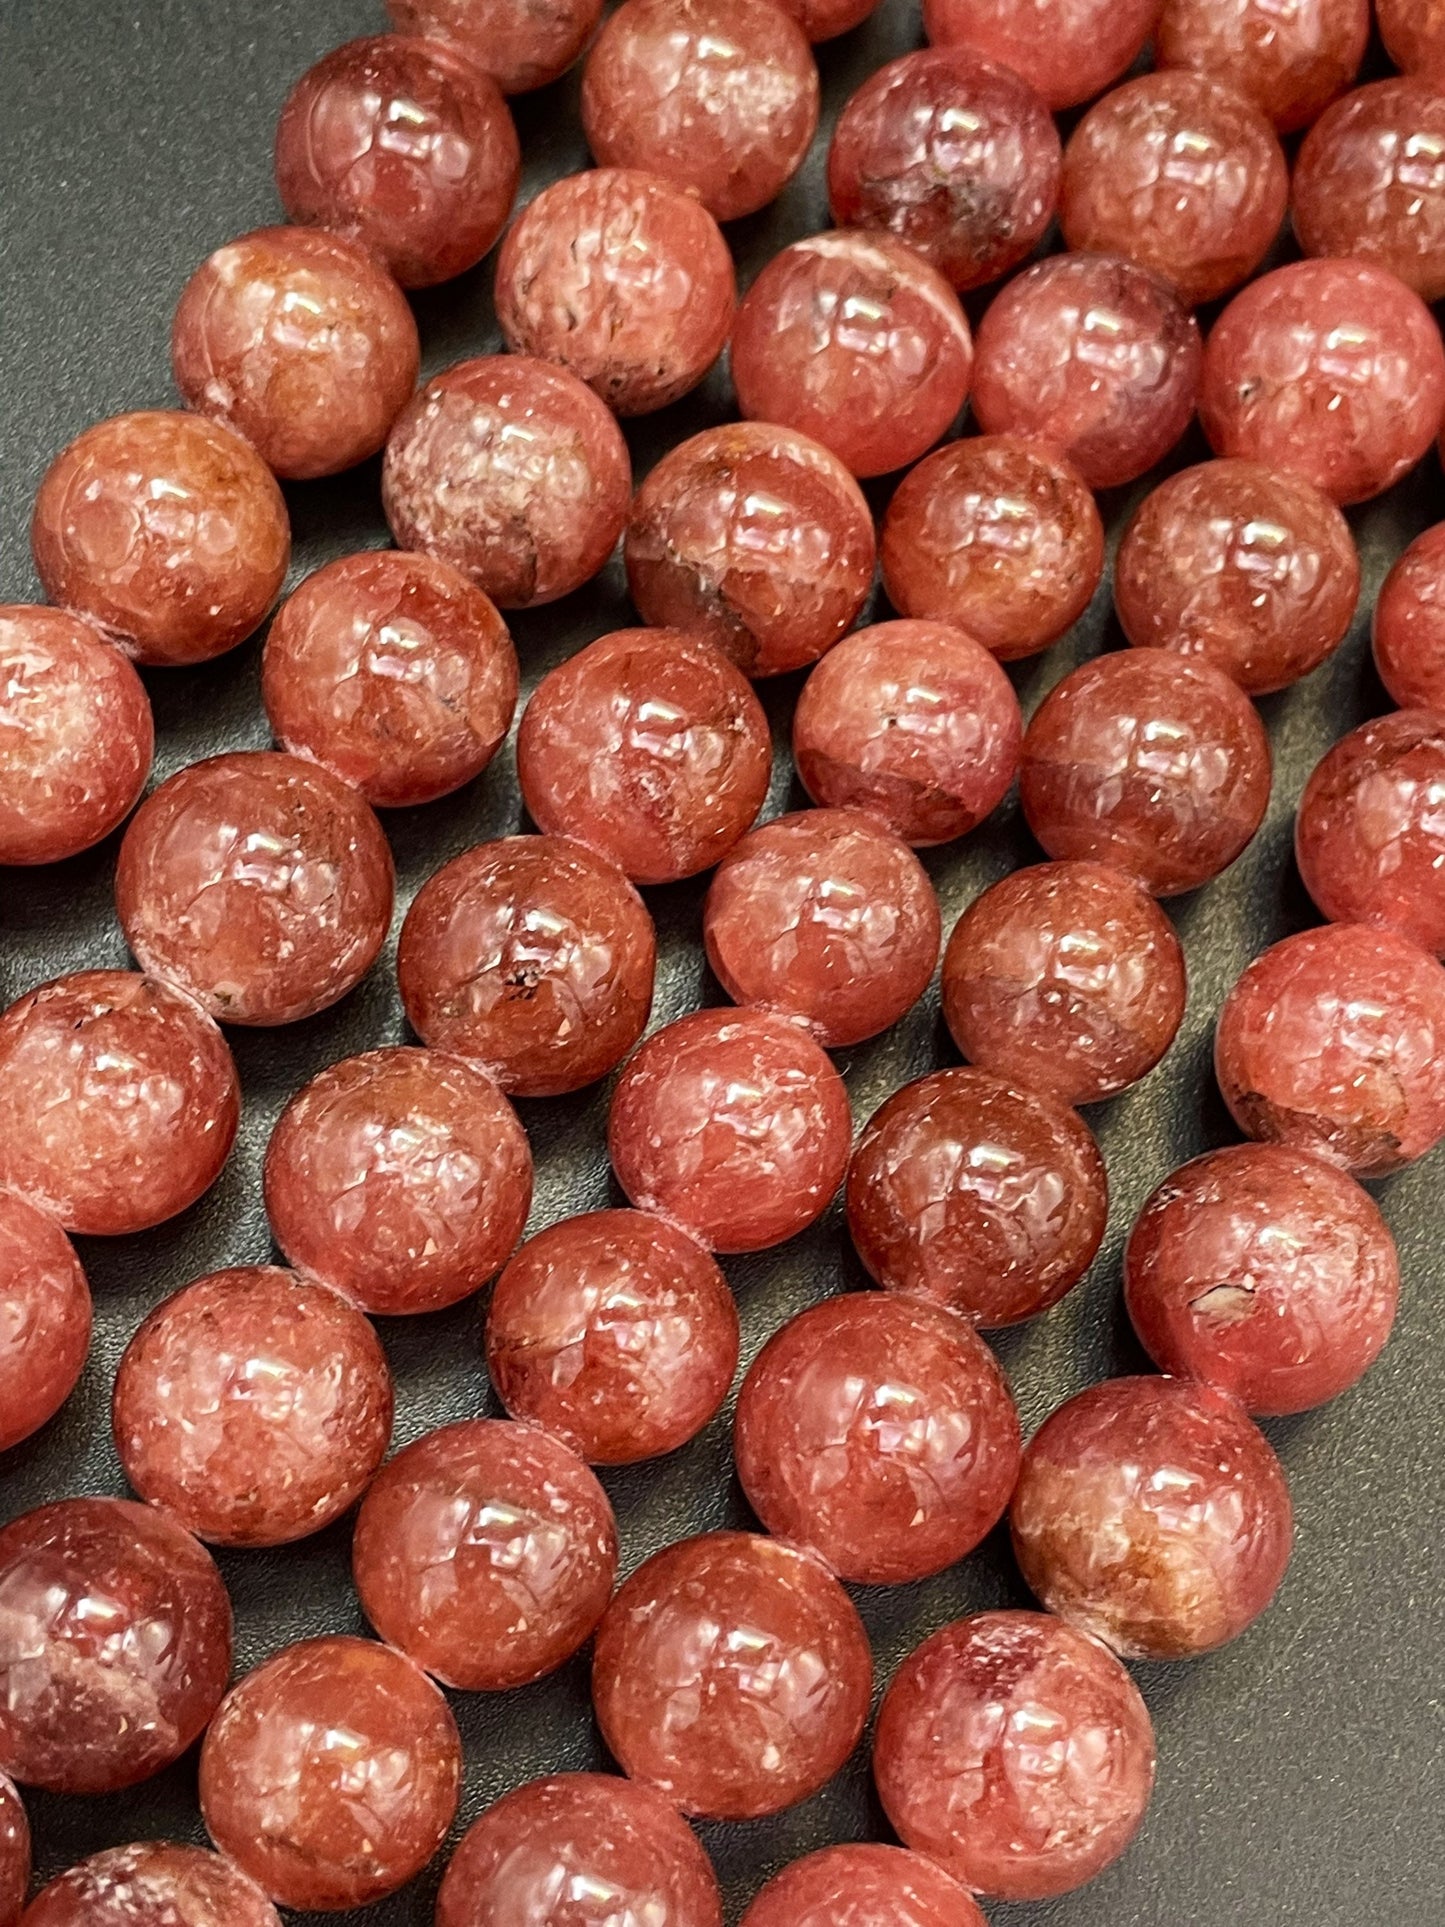 AAA Natural Rhodochrosite Gemstone Bead 6mm 8mm 10mm Round Bead, Gorgeous Pink Red Color Rhodochrosite Gemstone Beads, High Quality Beads